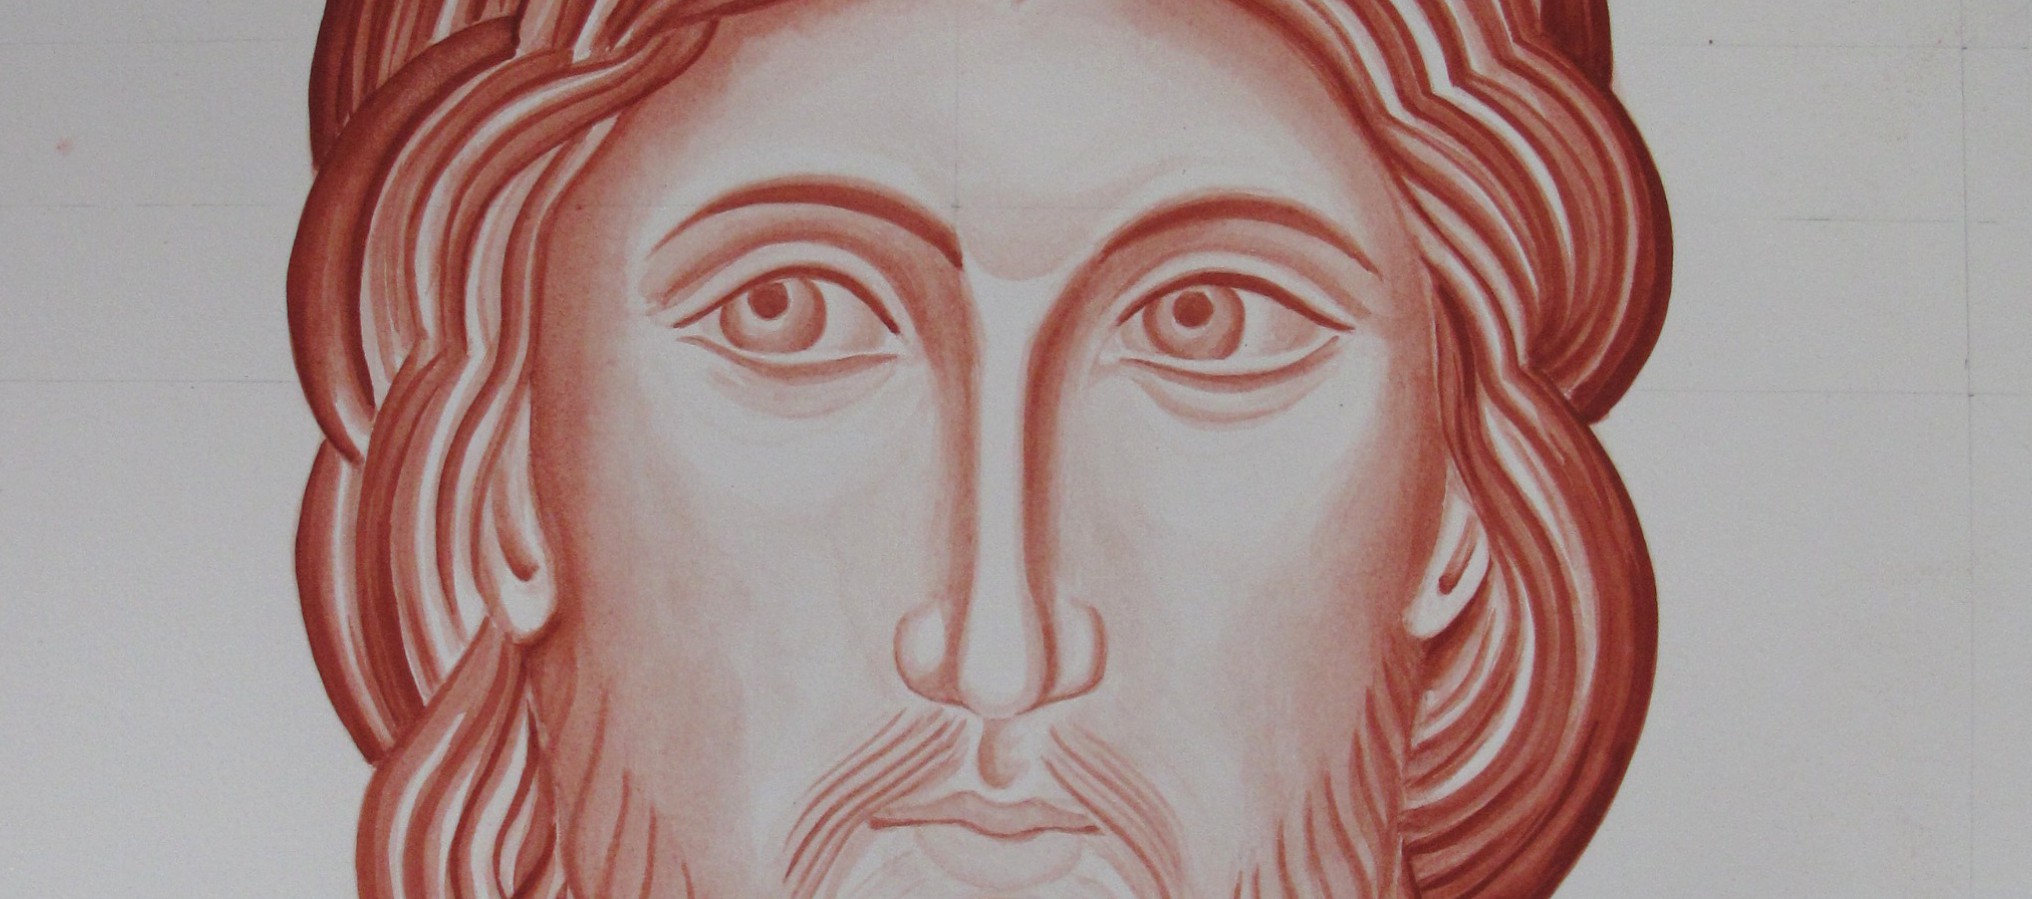 Third attempt at the monochrome of Christ for the Mandilion